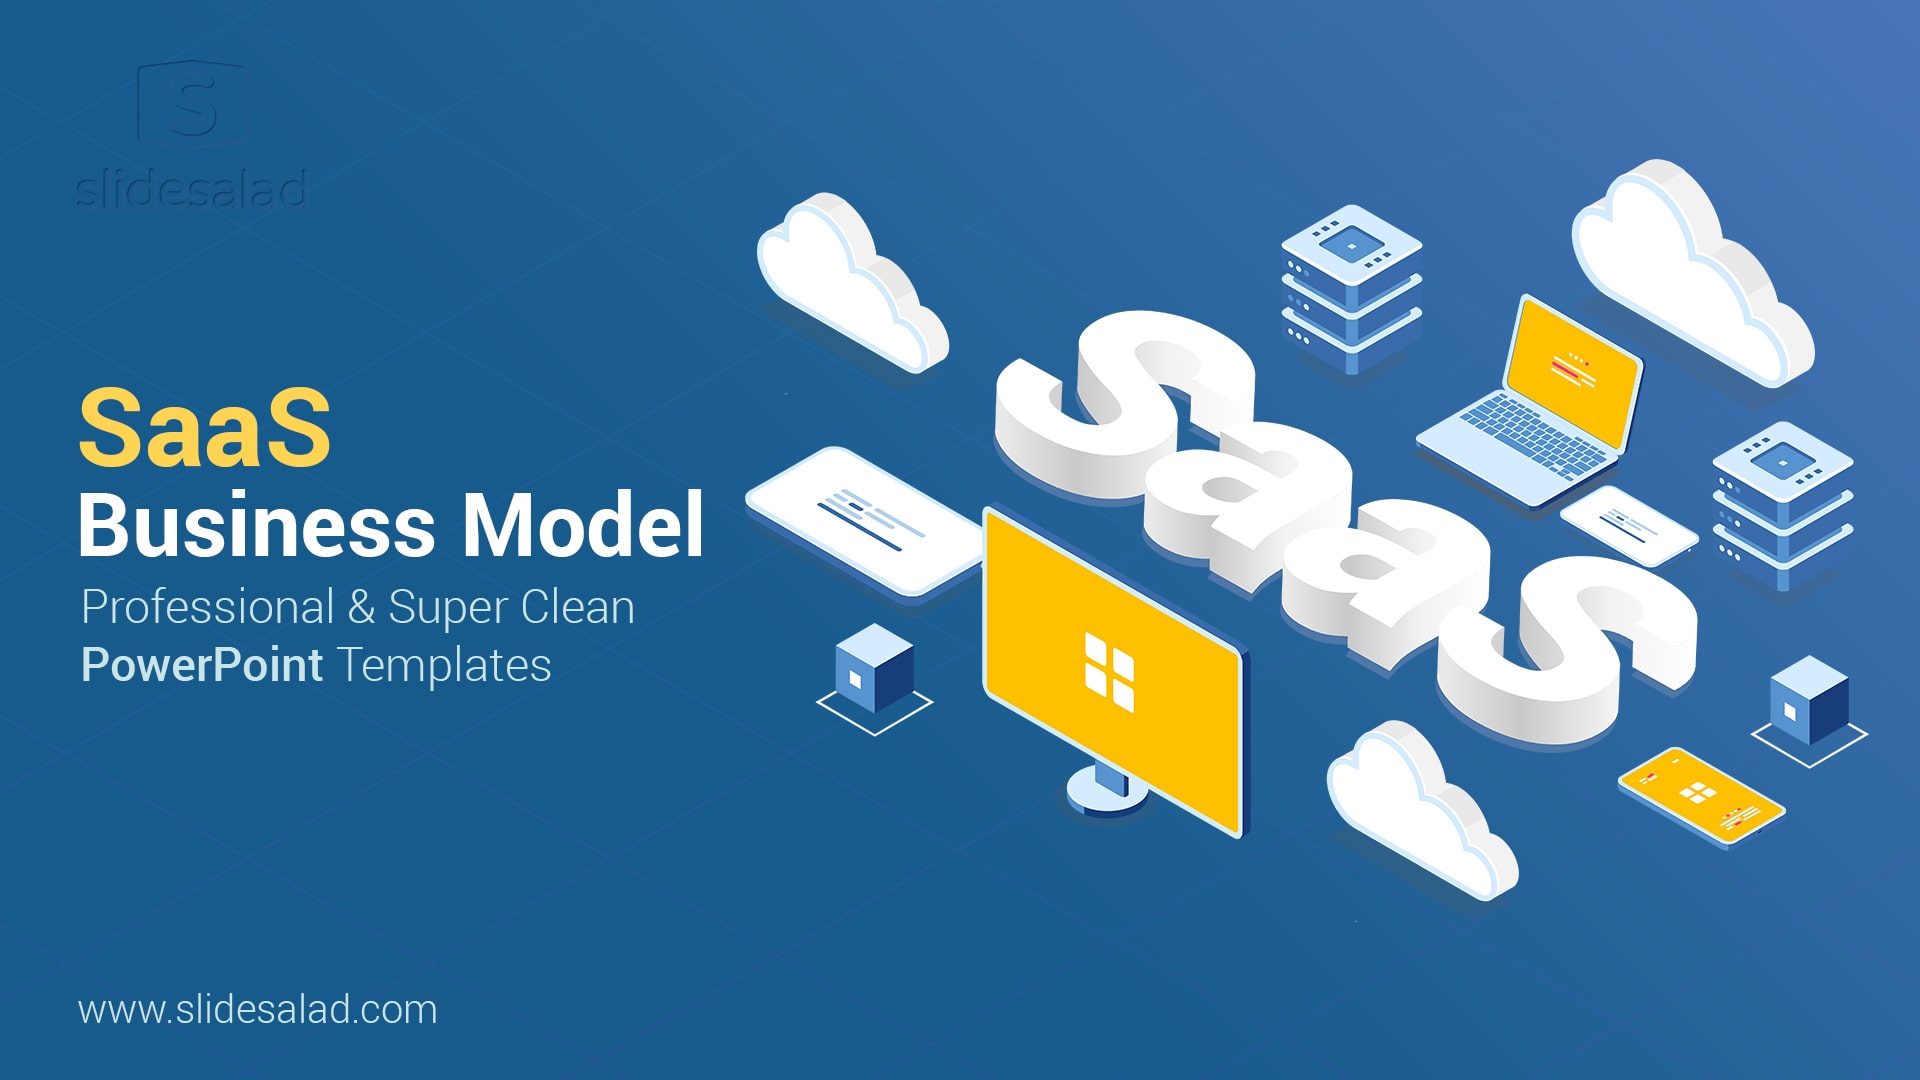 SaaS Business Model PowerPoint Template - Present an Elegant Microsoft PowerPoint Presentation About the Secret to a Steady Income: The SaaS Revenue Model